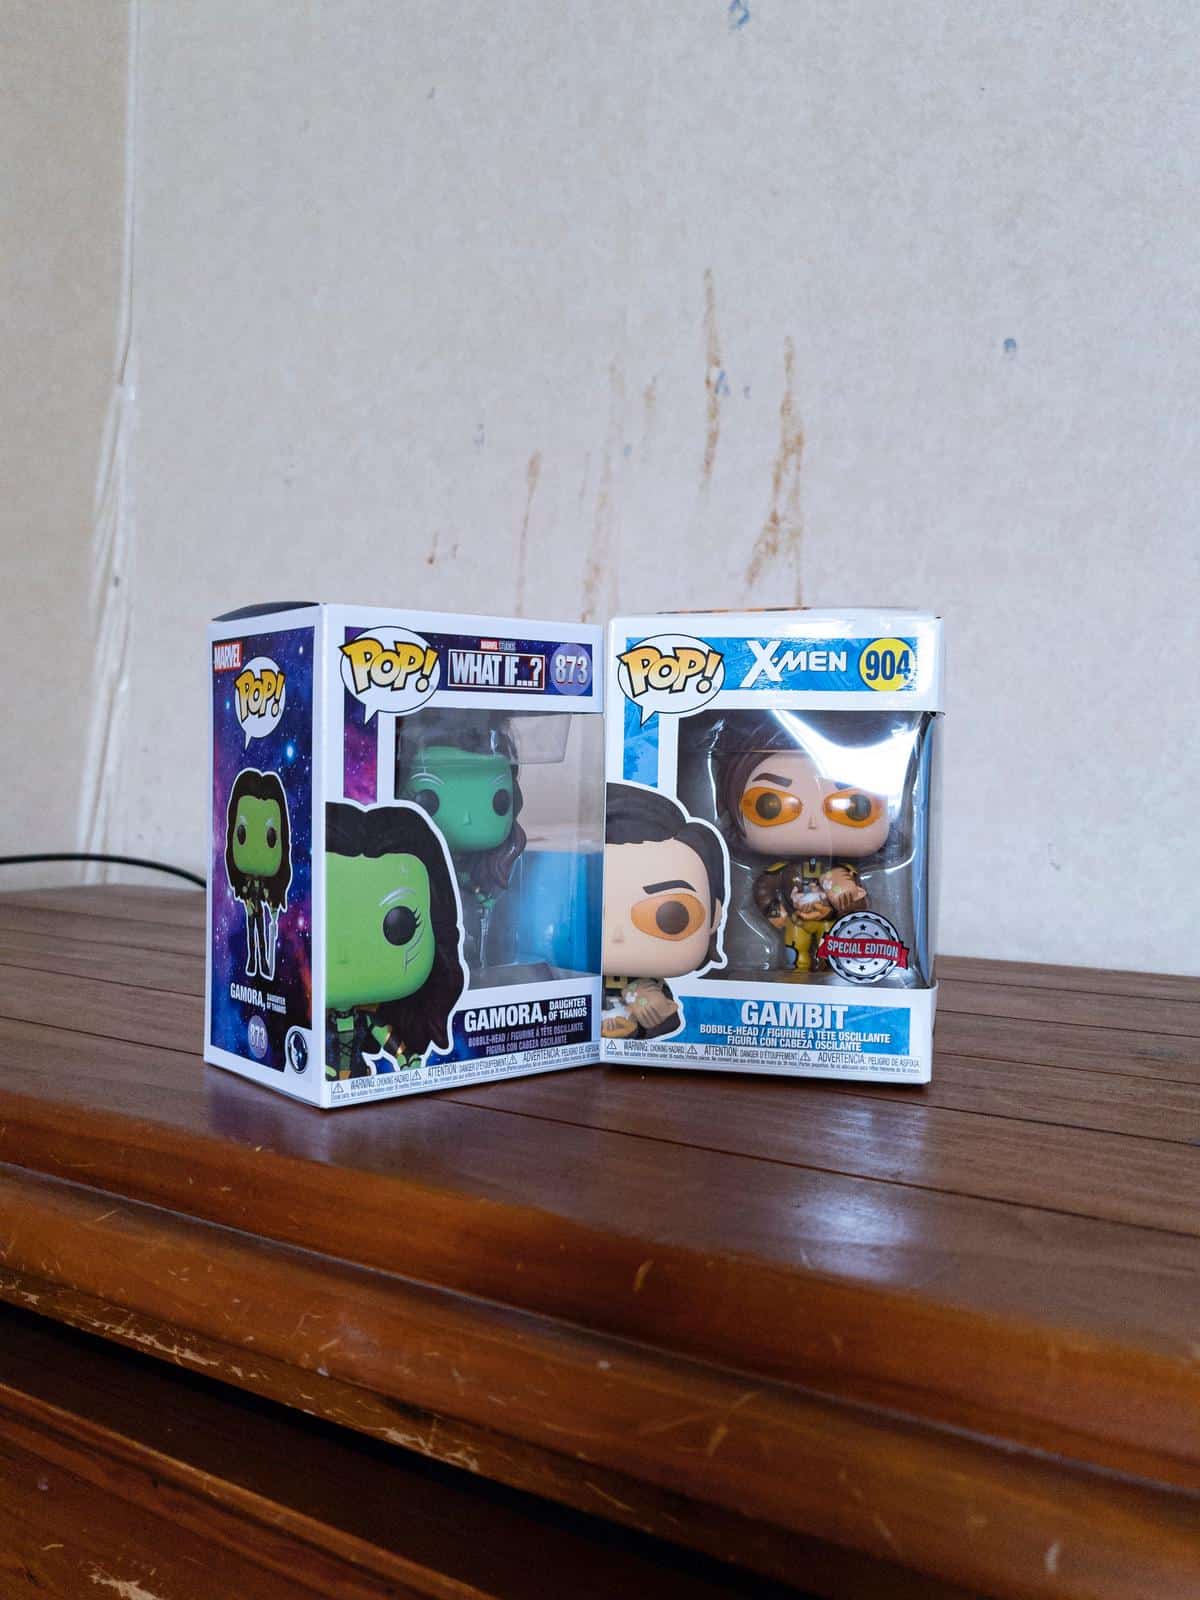 A diverse collection of Funko Pop figures on display, showcasing the variety and appeal of these collectibles.